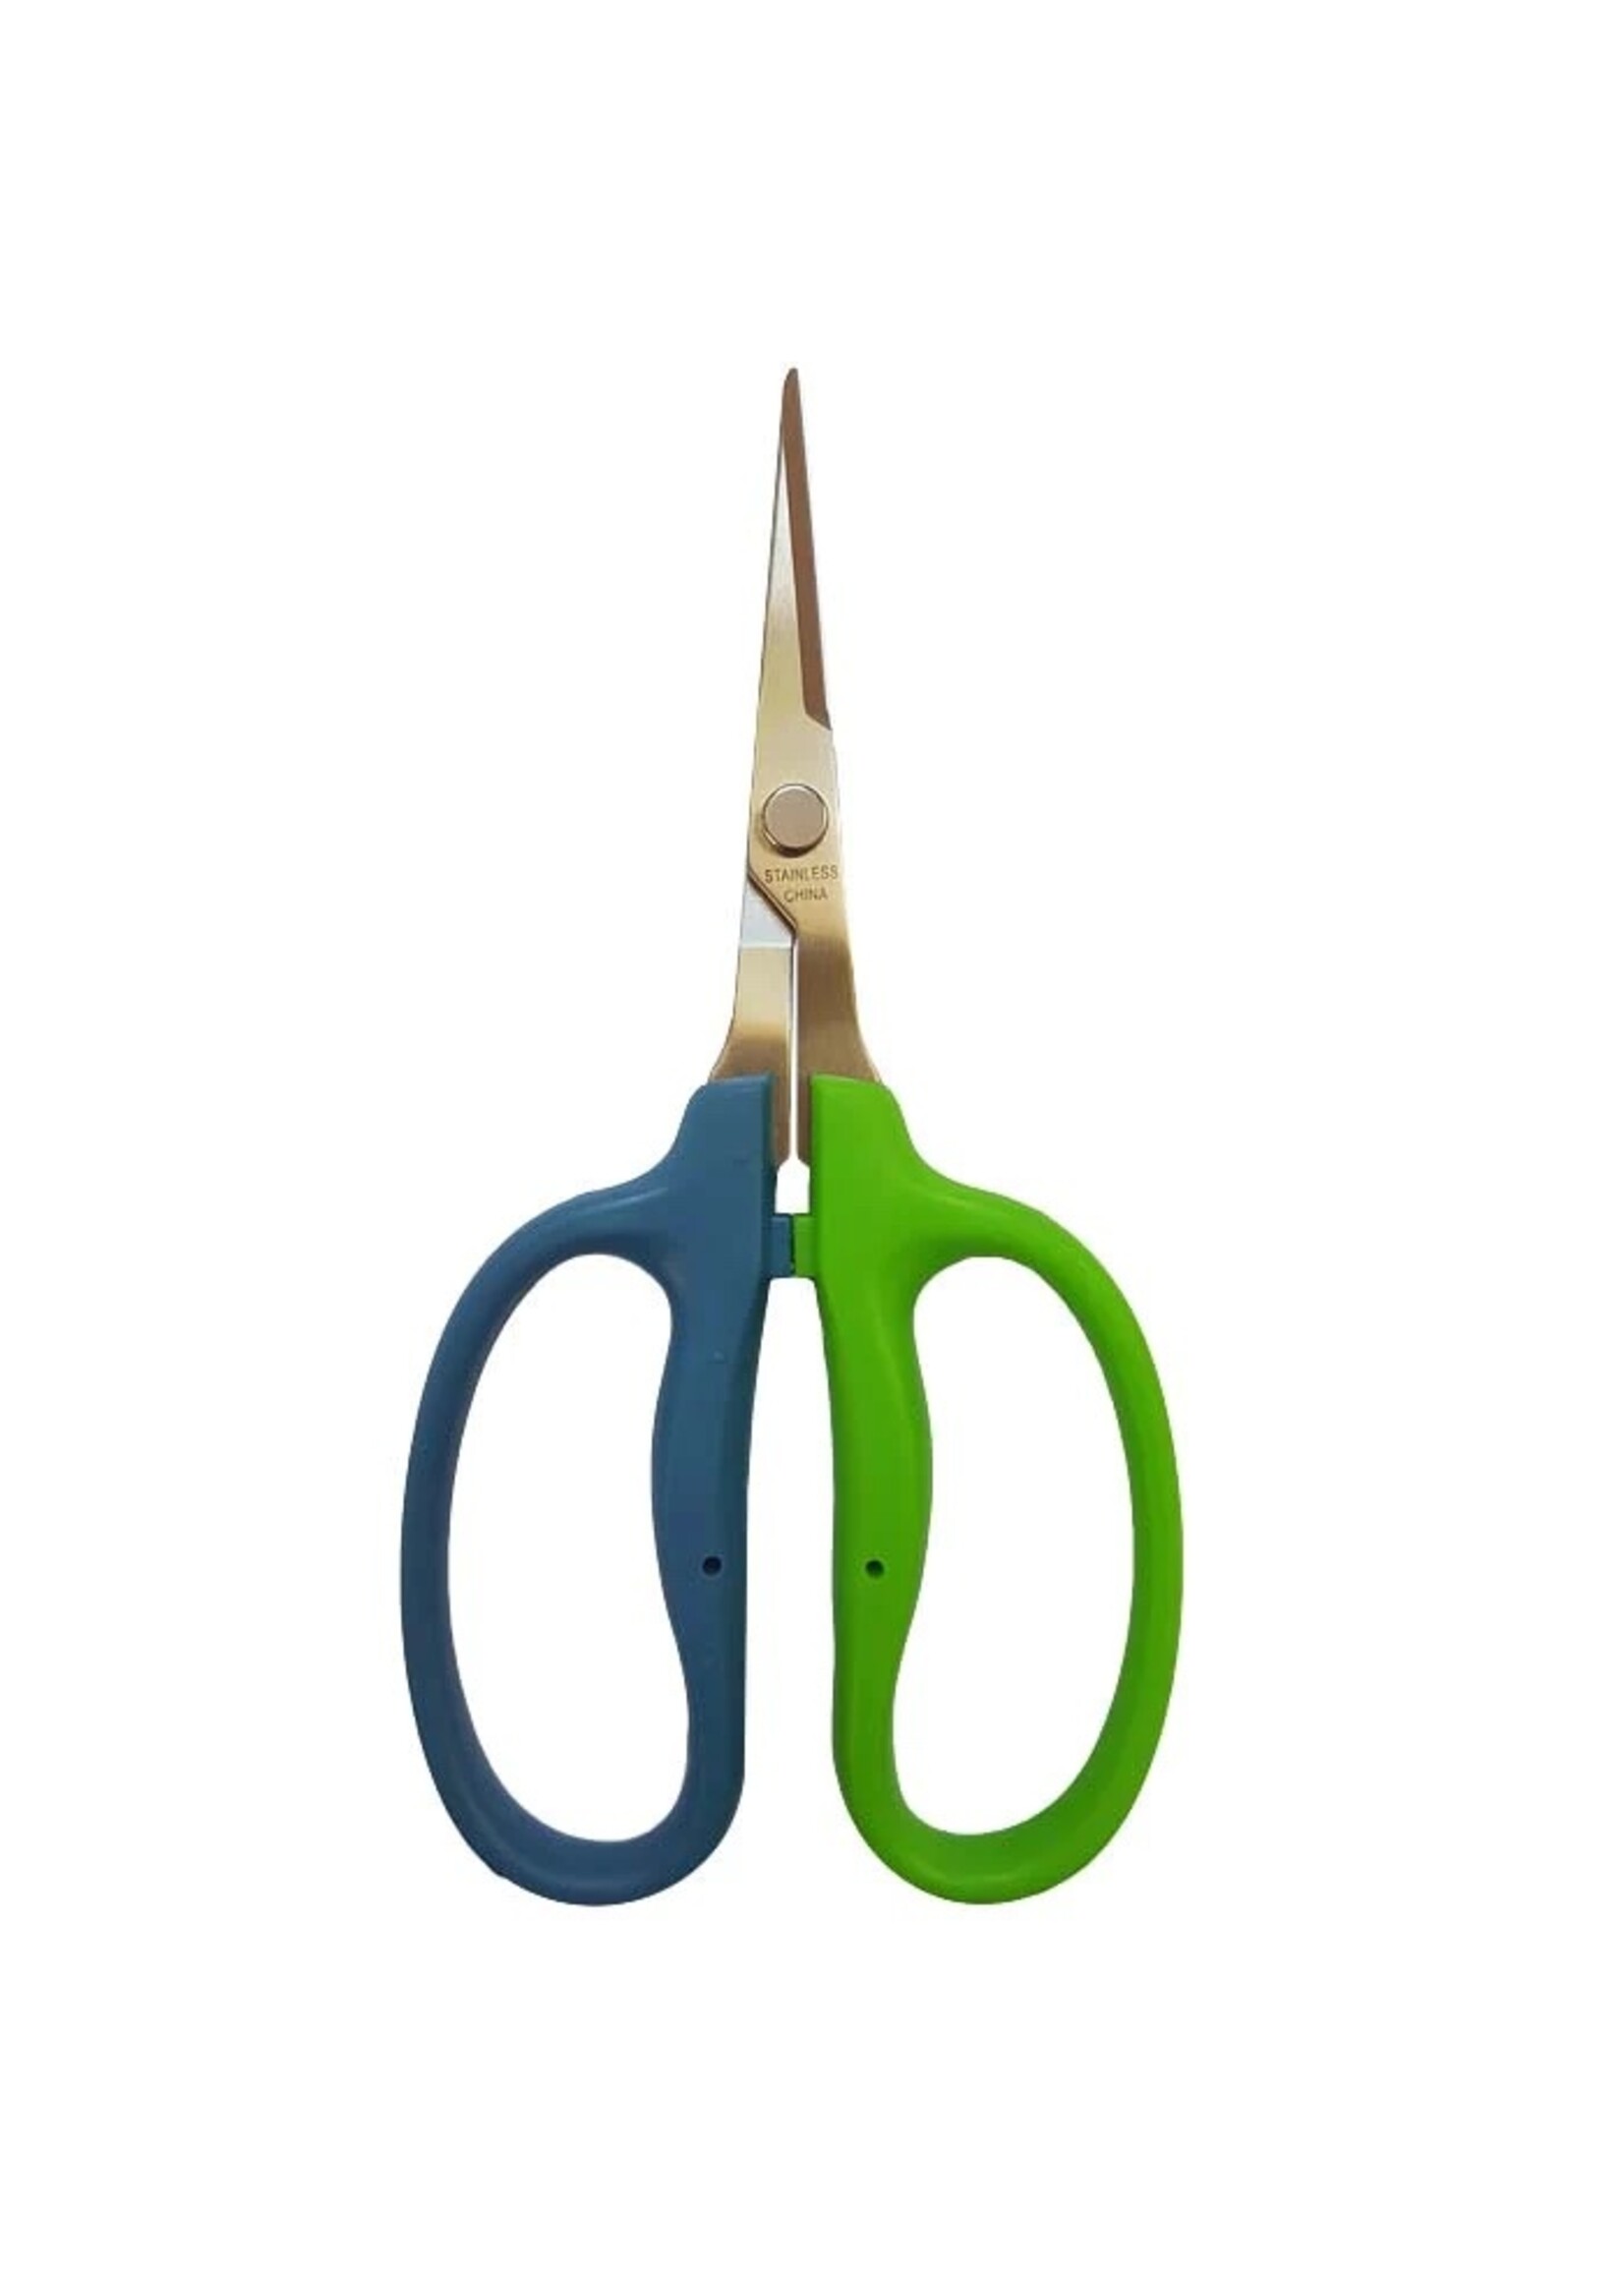 The Green Scissors Trimming Shears